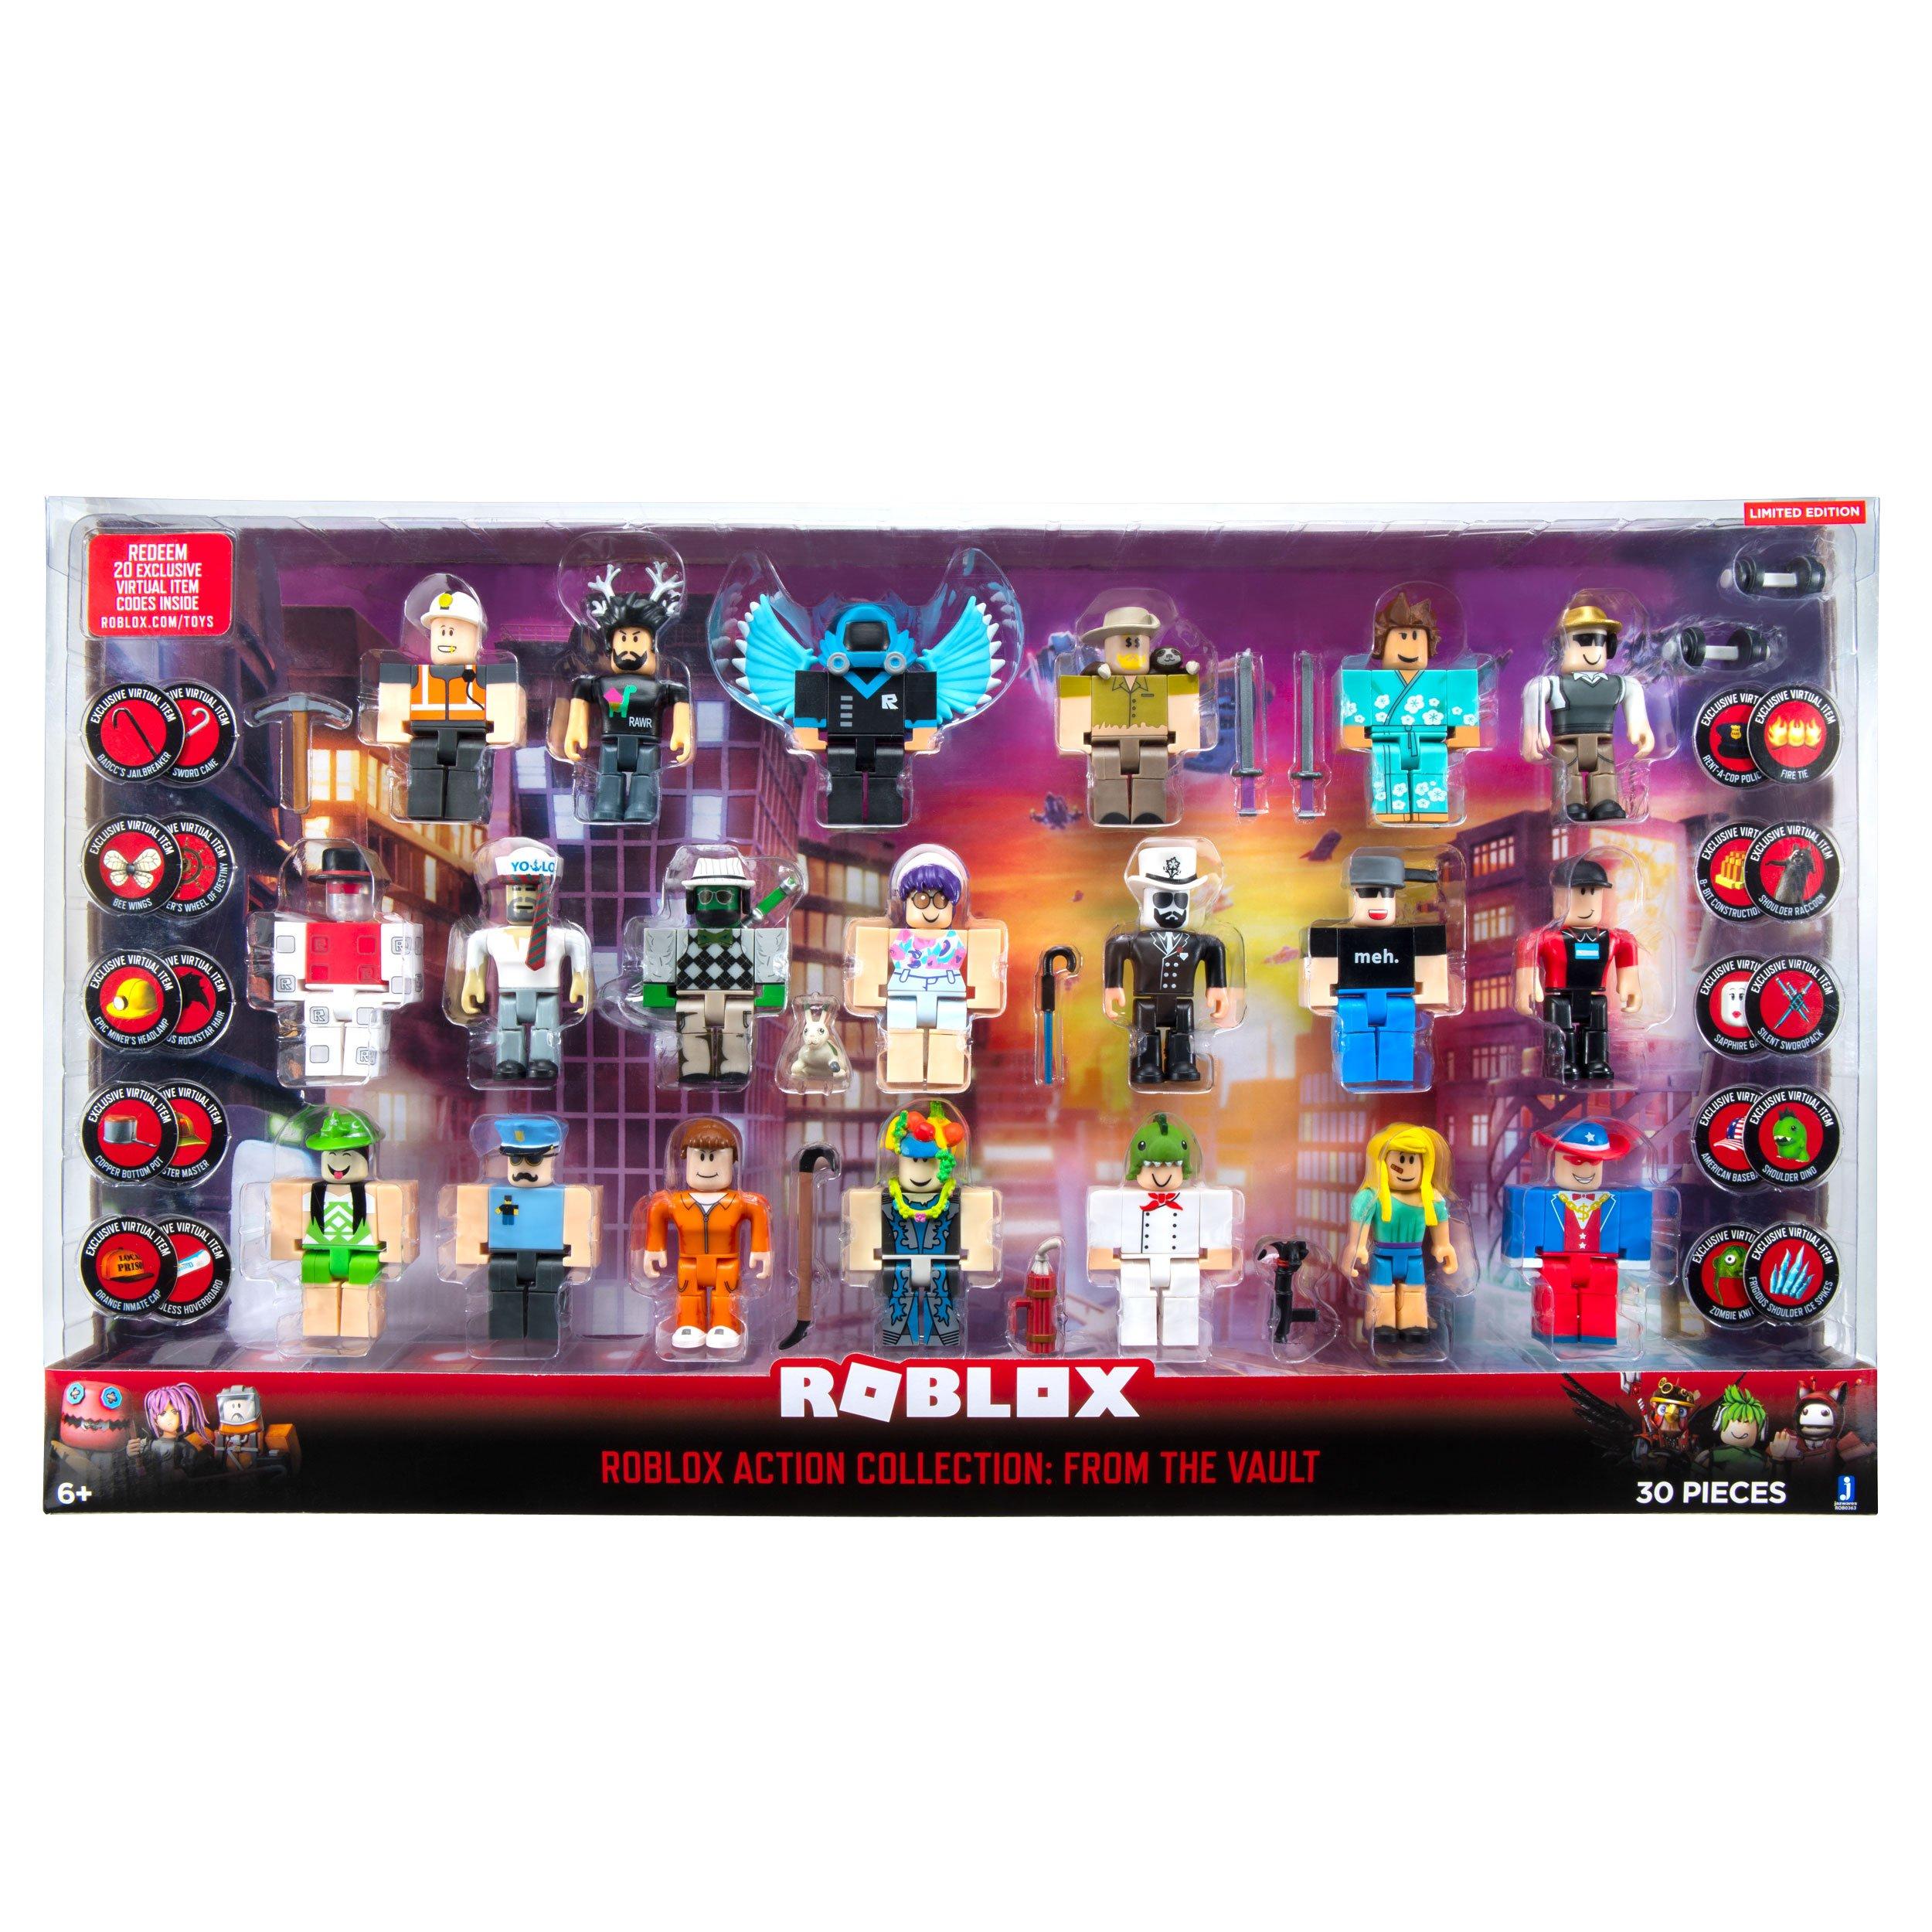 Roblox Action Collection From The Vault 20 Pack Includes Exclusive Virtual Item Gamestop - roblox classic items